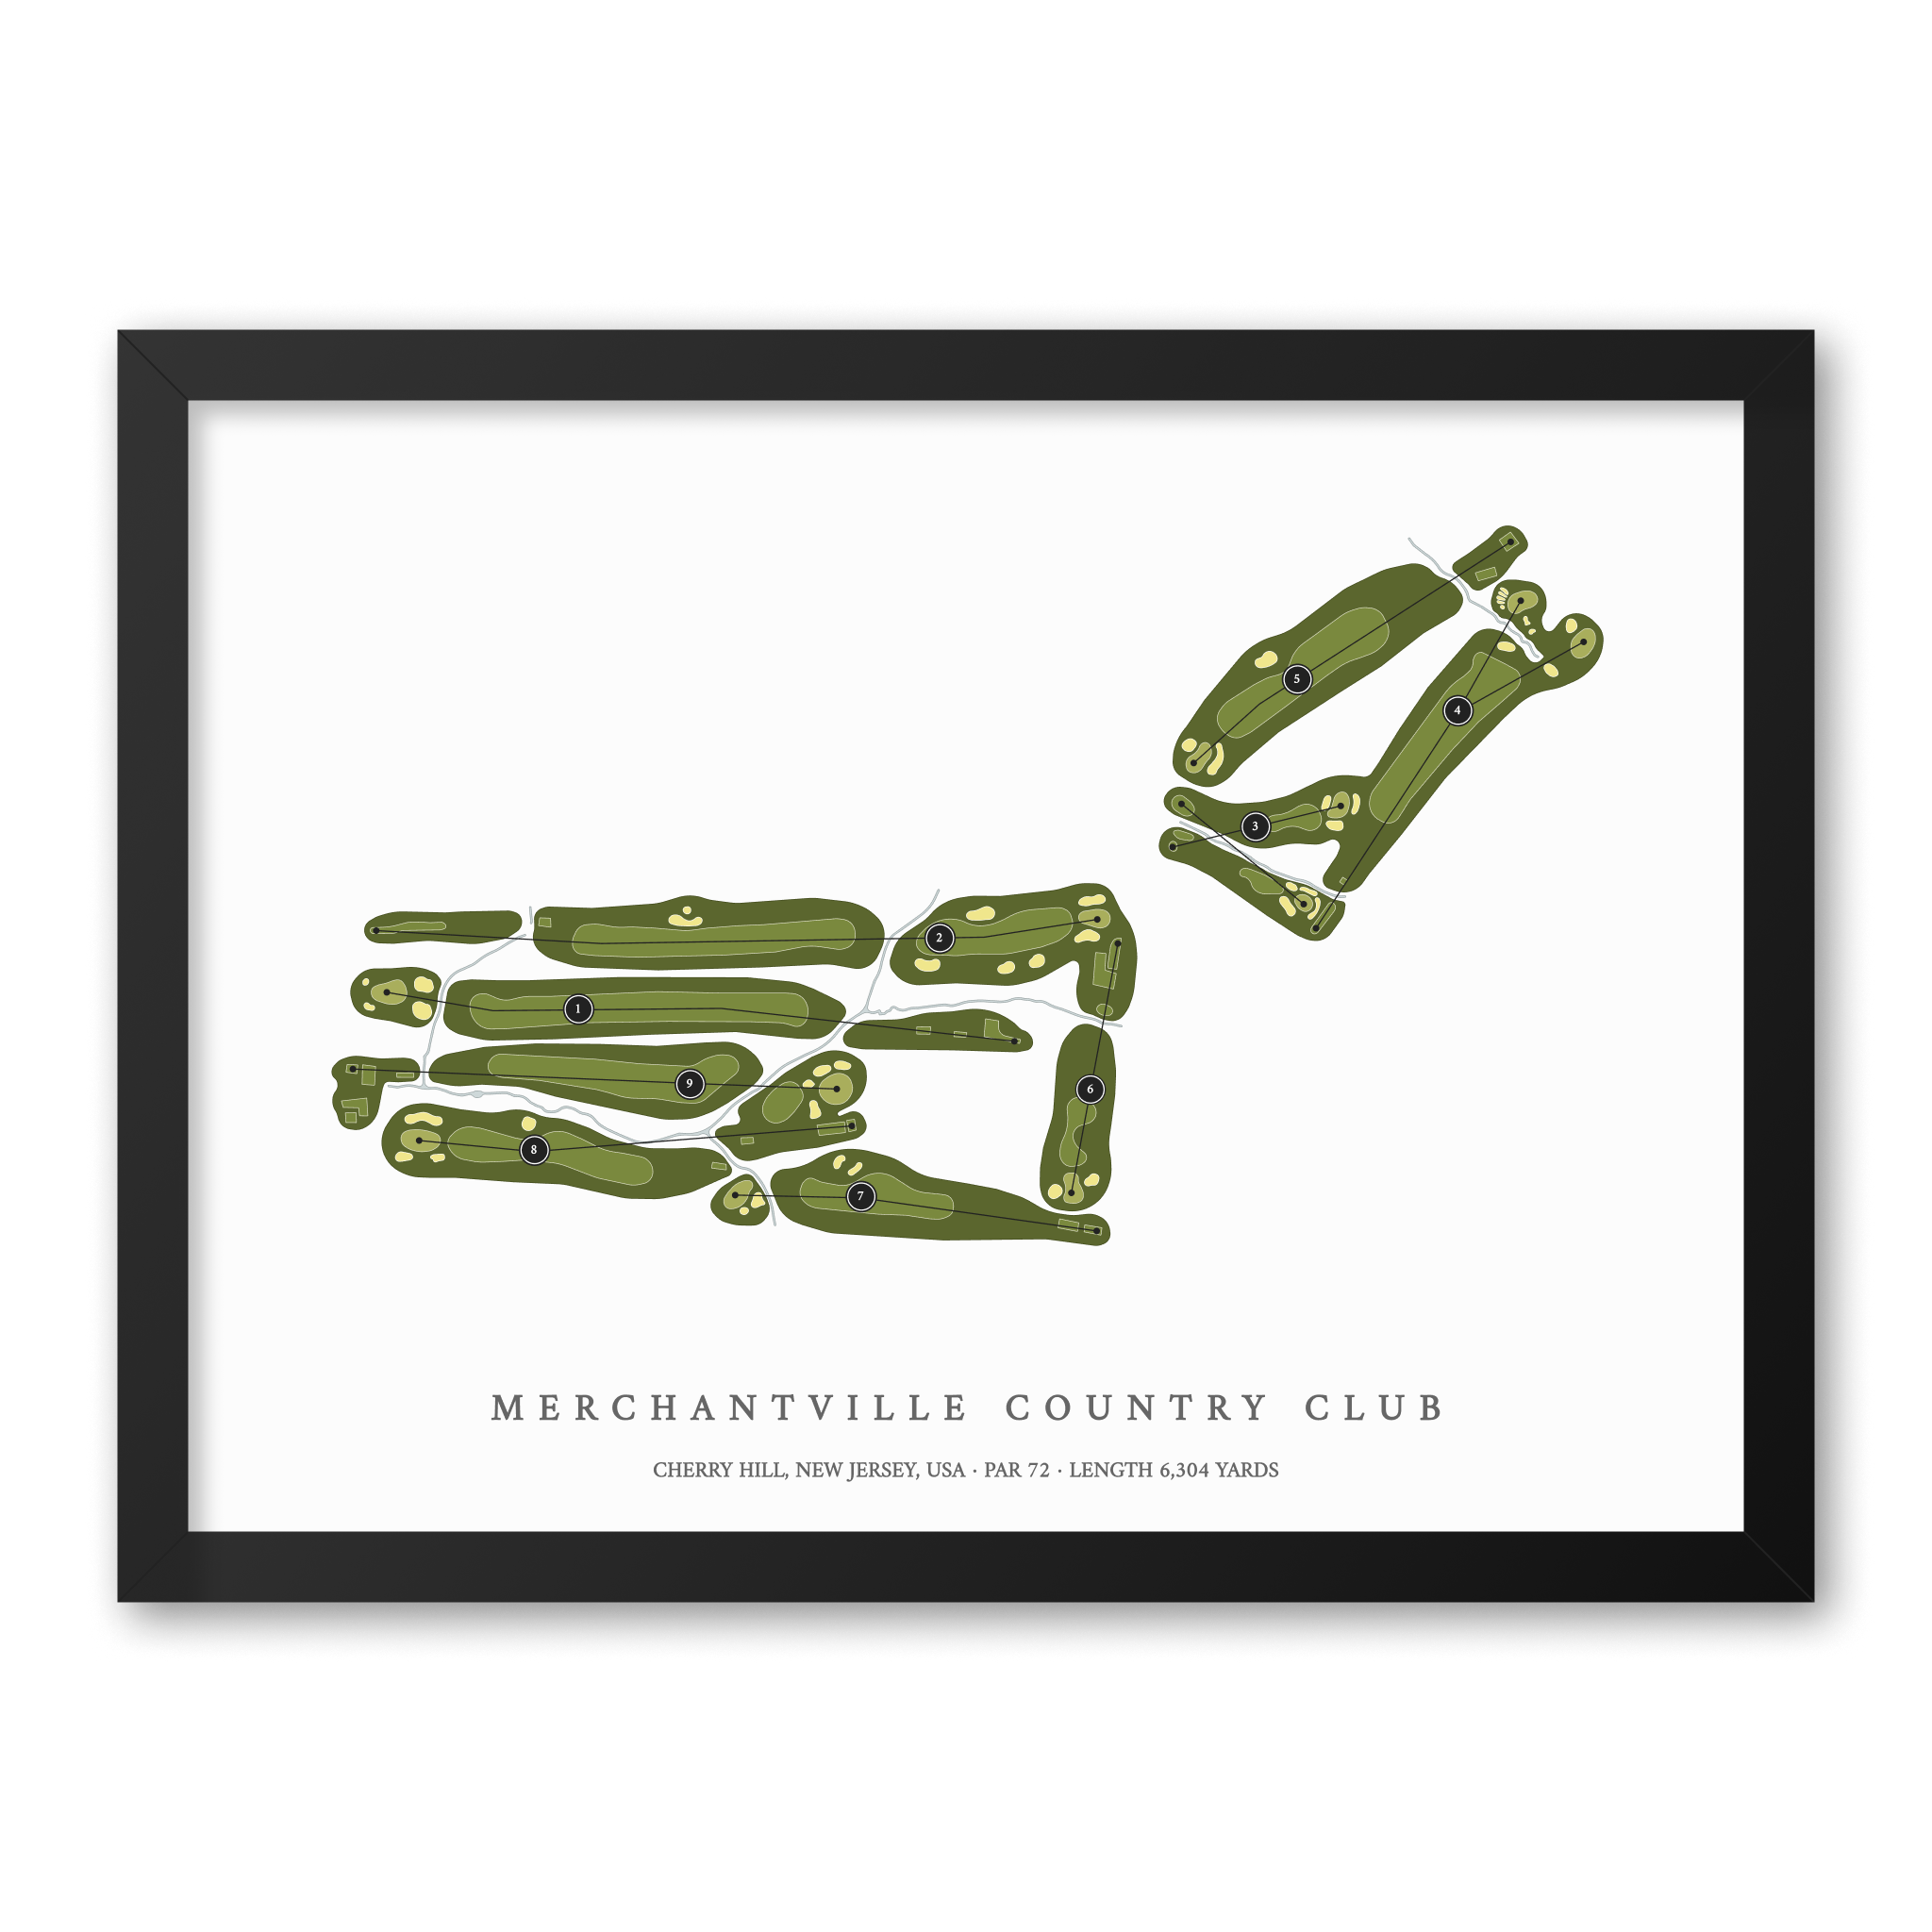 Merchantville Country Club | Golf Course Map | Black Frame With Hole Numbers #hole numbers_yes